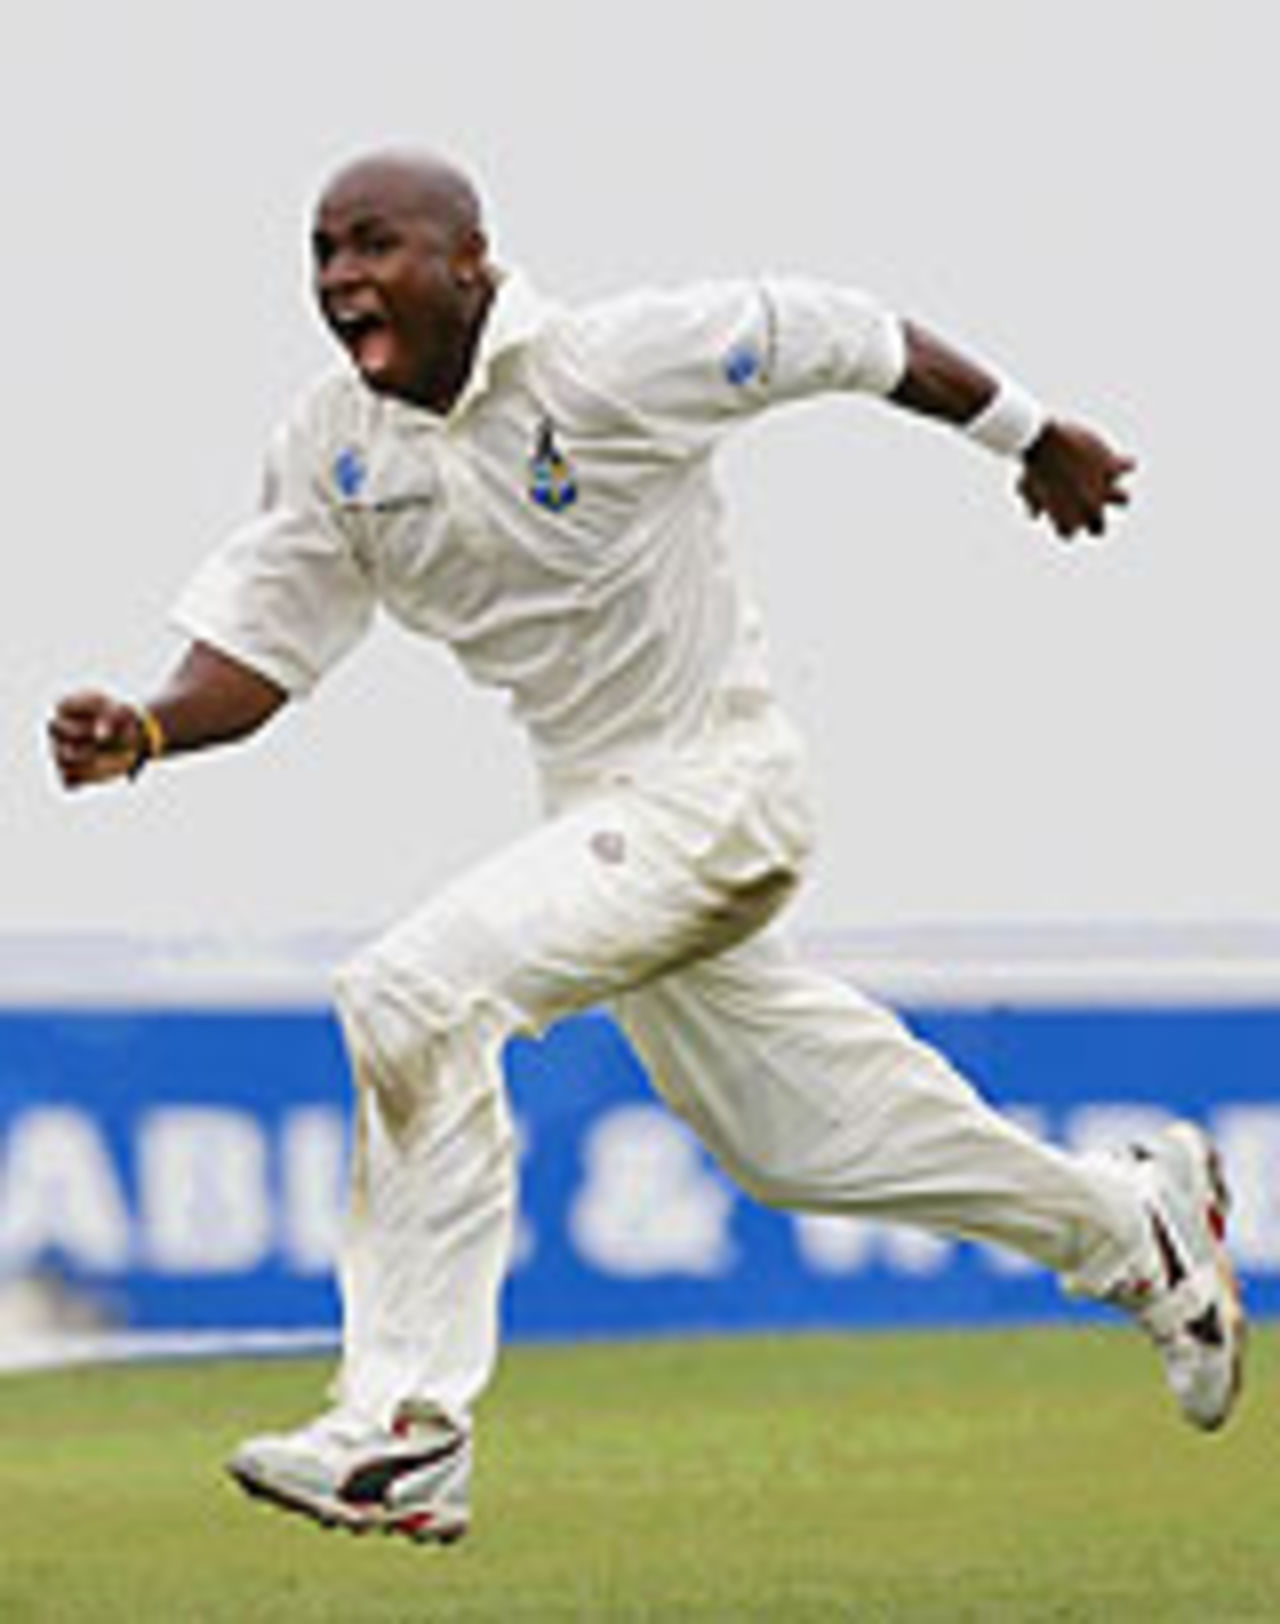 Tino Best celebrates in style after picking up his first Test wicket on the third day at Kingston, West Indies v England, 1st Test, Kingston, 3rd day, March 13, 2004